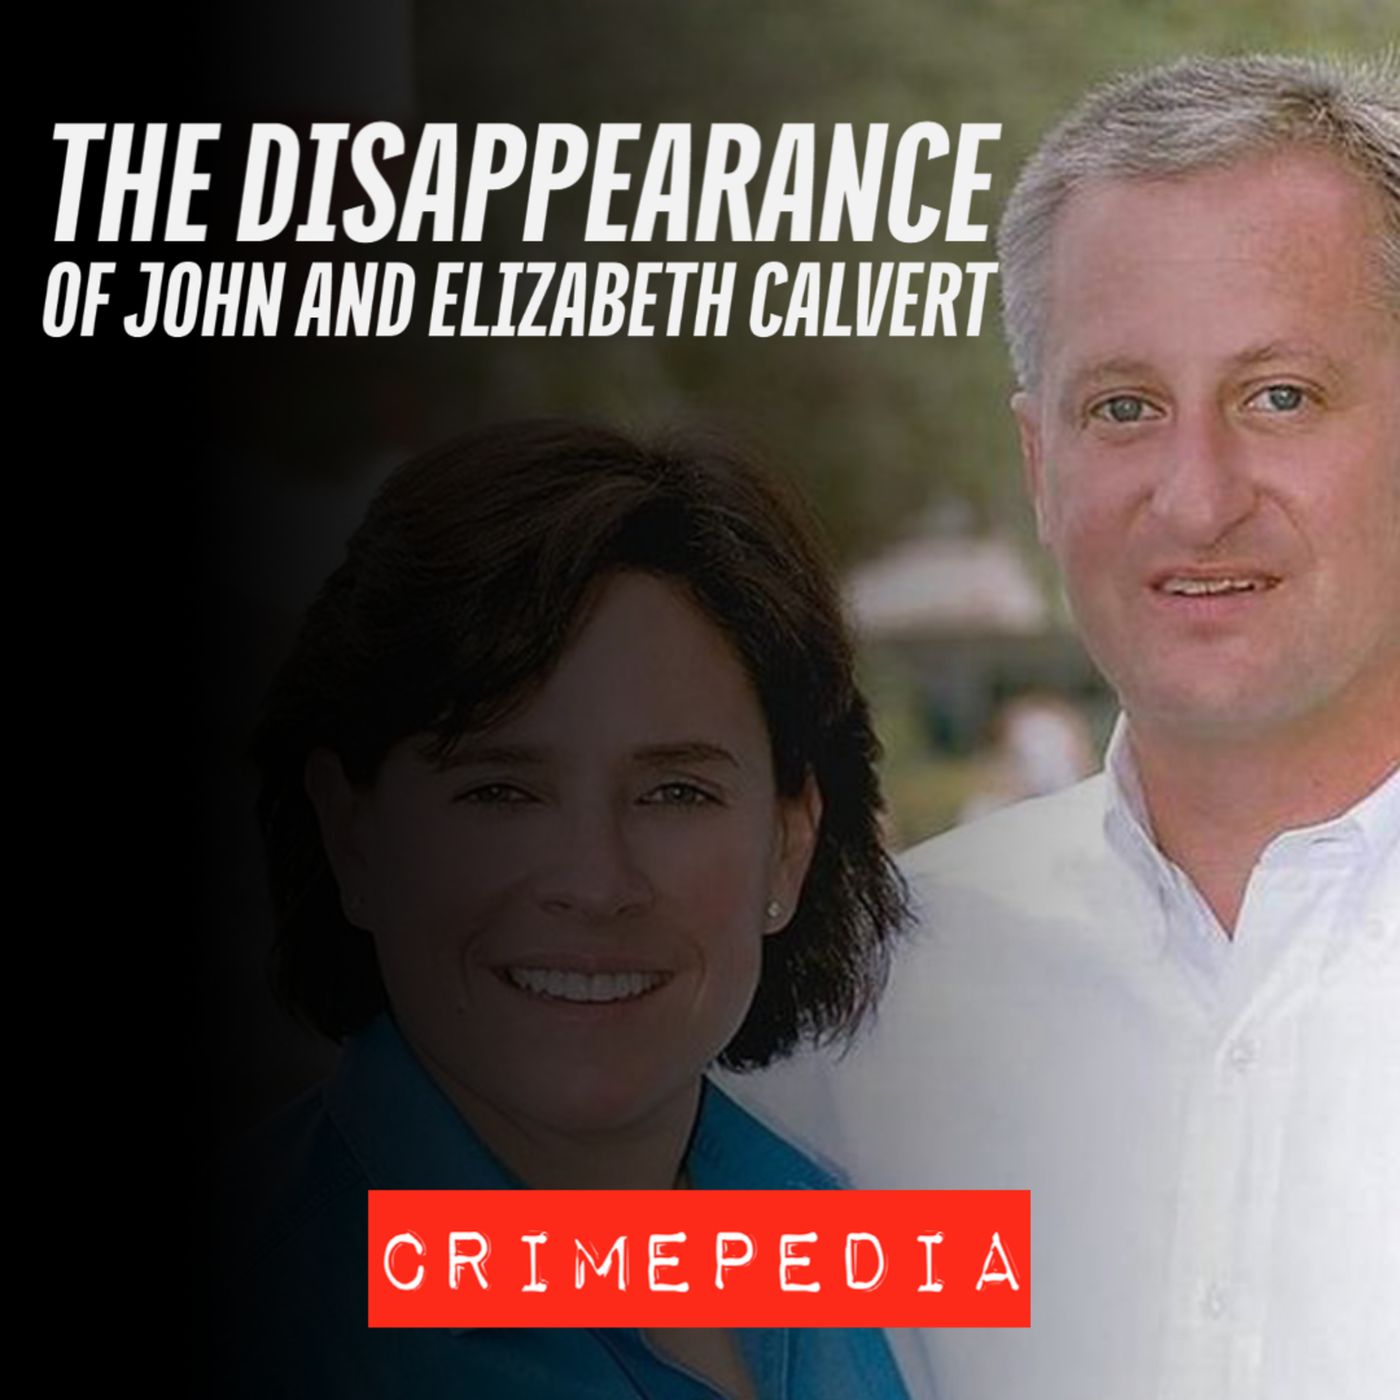 The Disappearance of John and Elizabeth Calvert